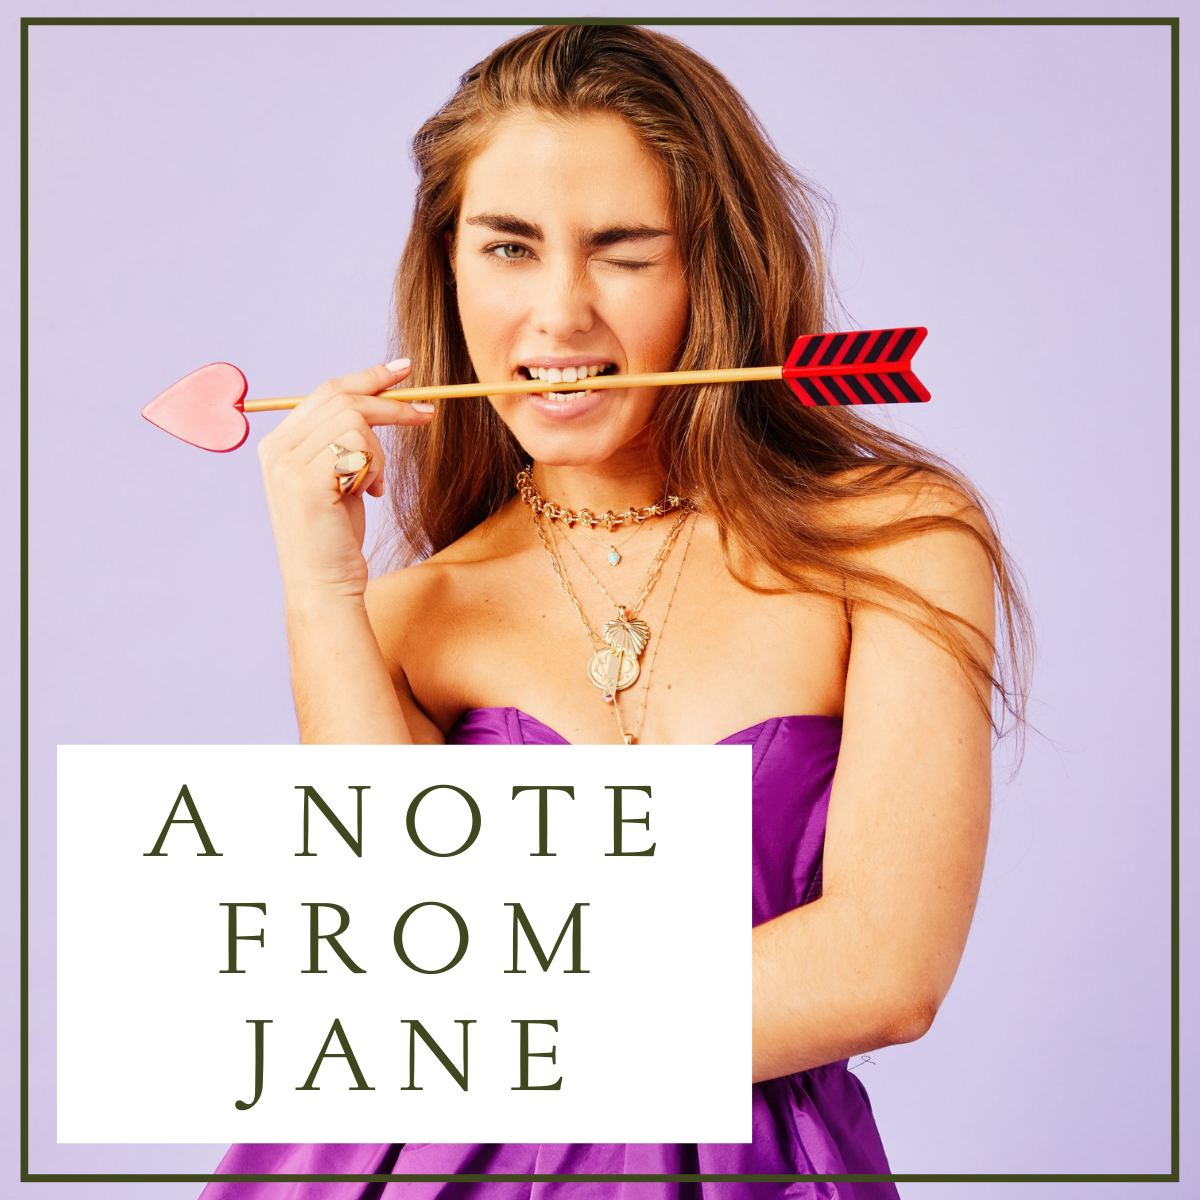 A Note from Jane: Valentine's Day is my favorite holiday, here's why...